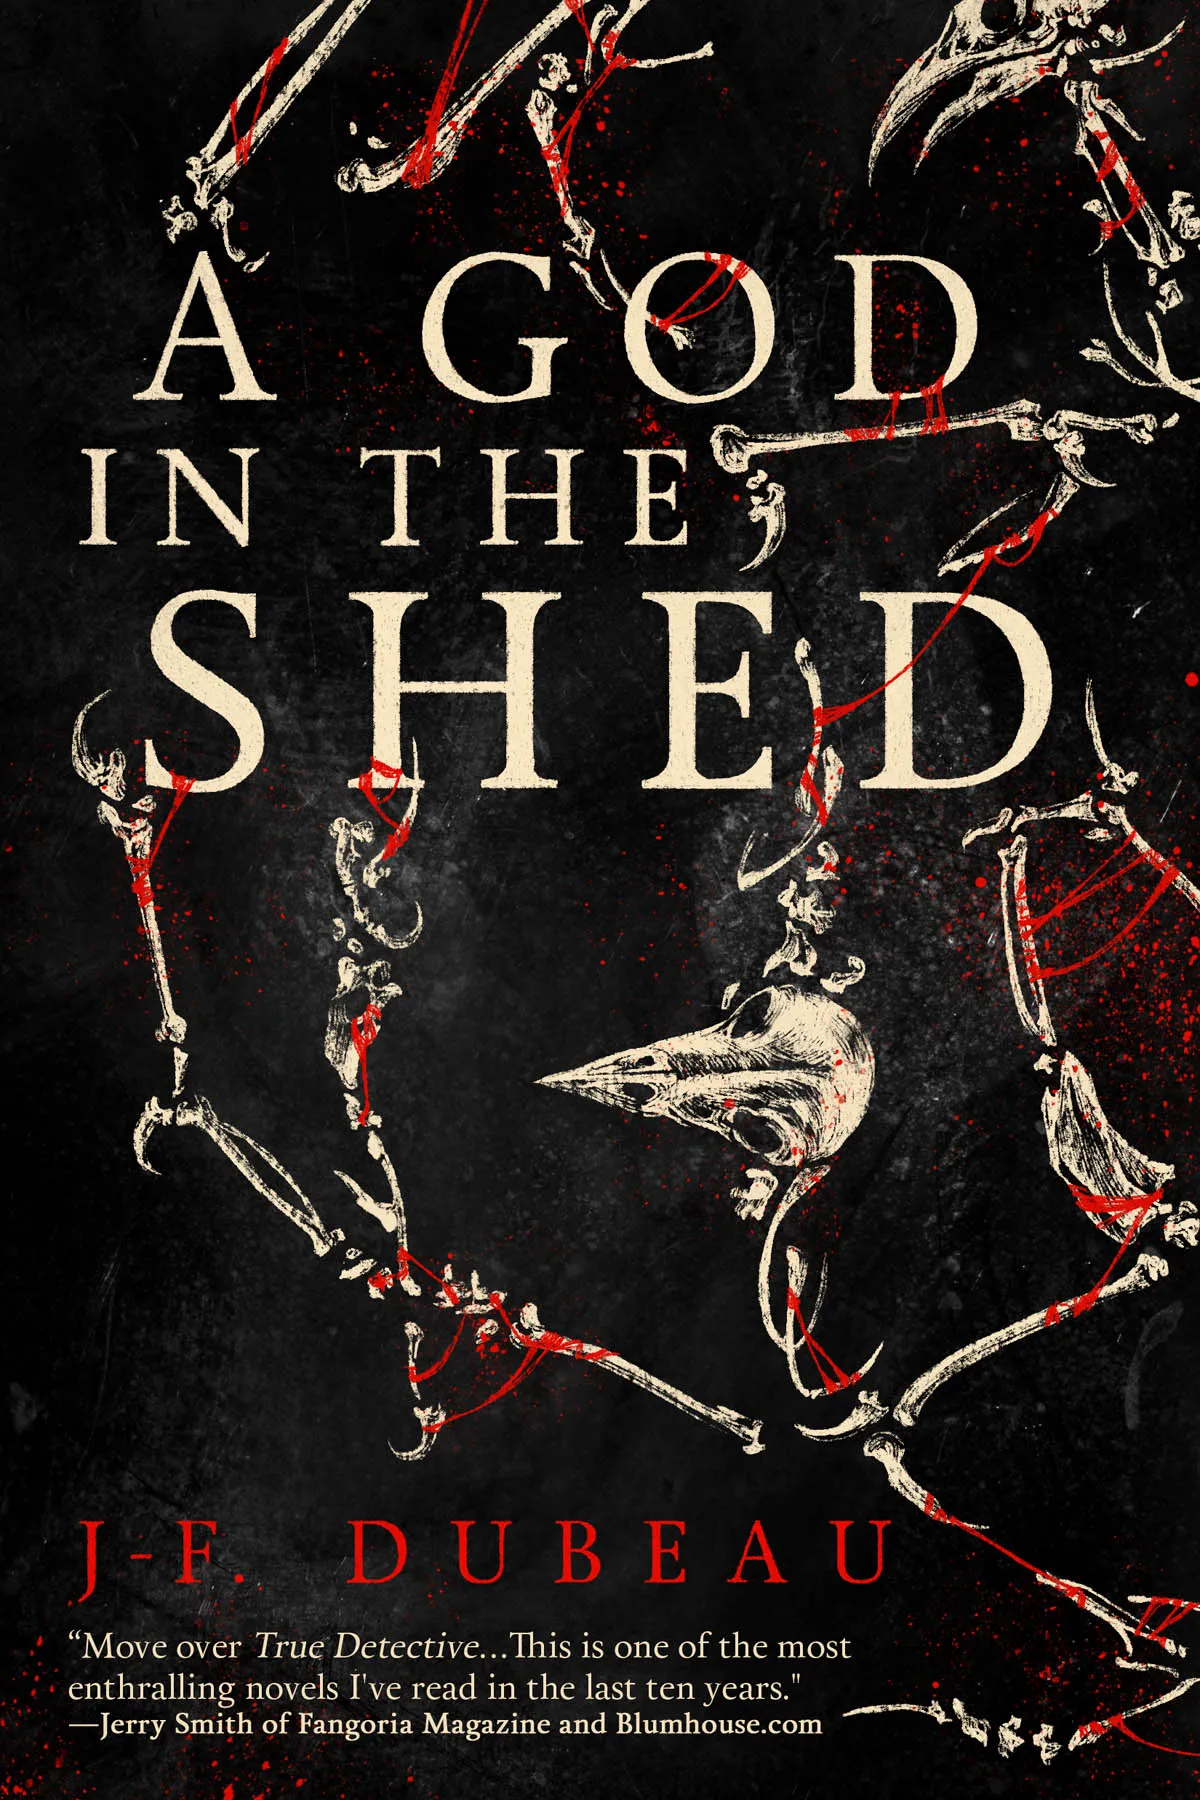 A God in the Shed (A God in the Shed #1)